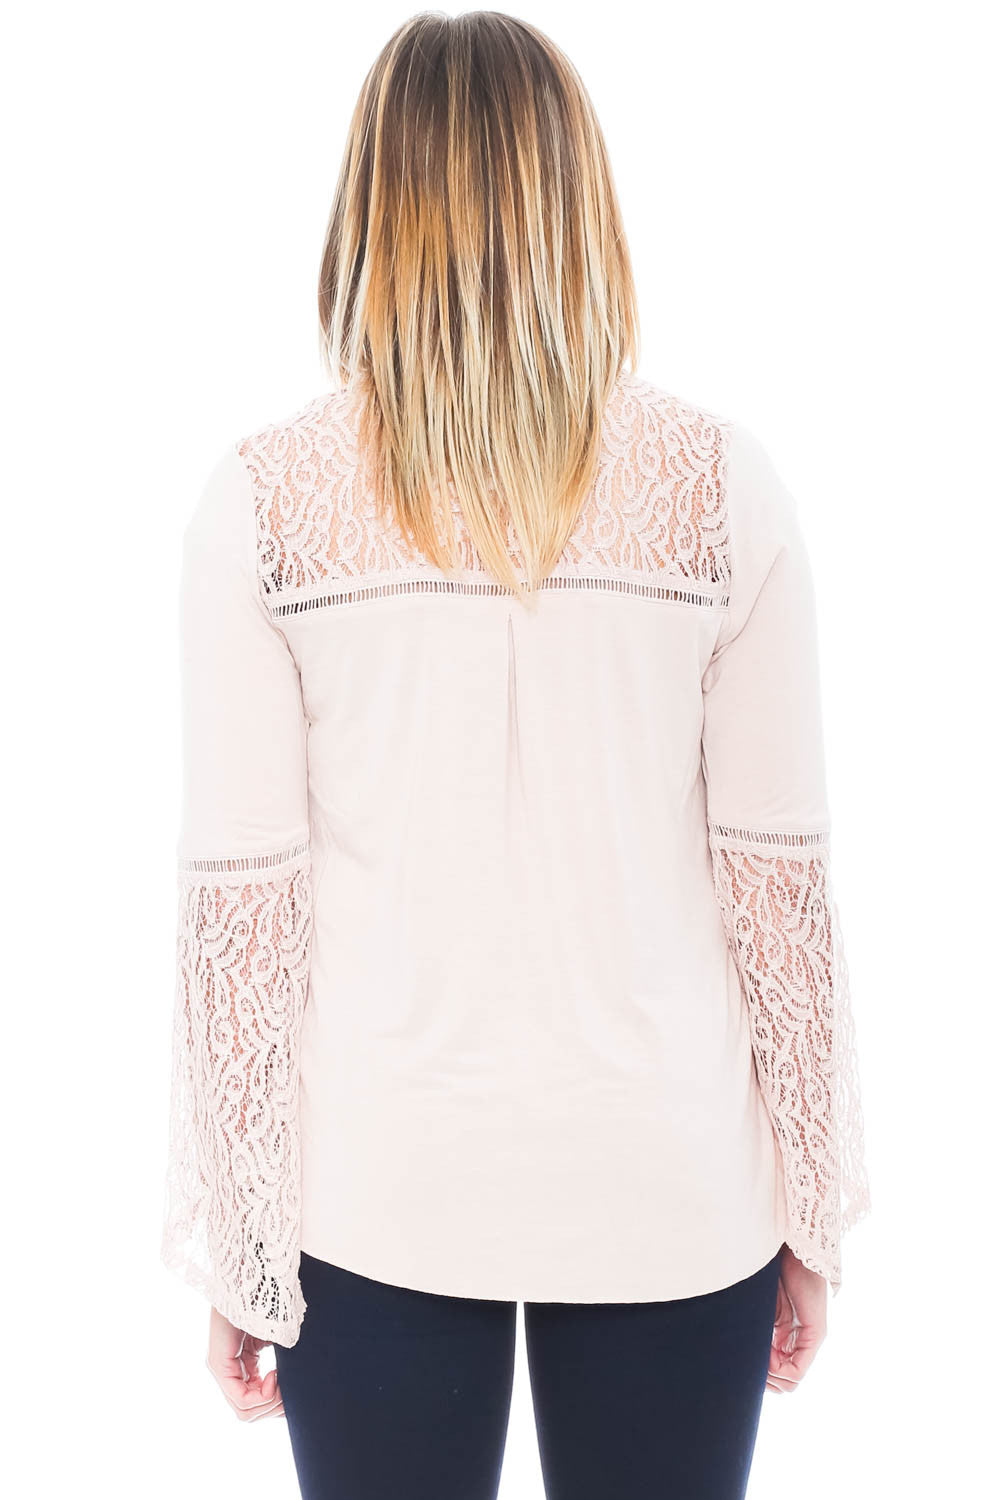 Shirt - Bell Sleeve Top with Criss-Cross Front By Democracy